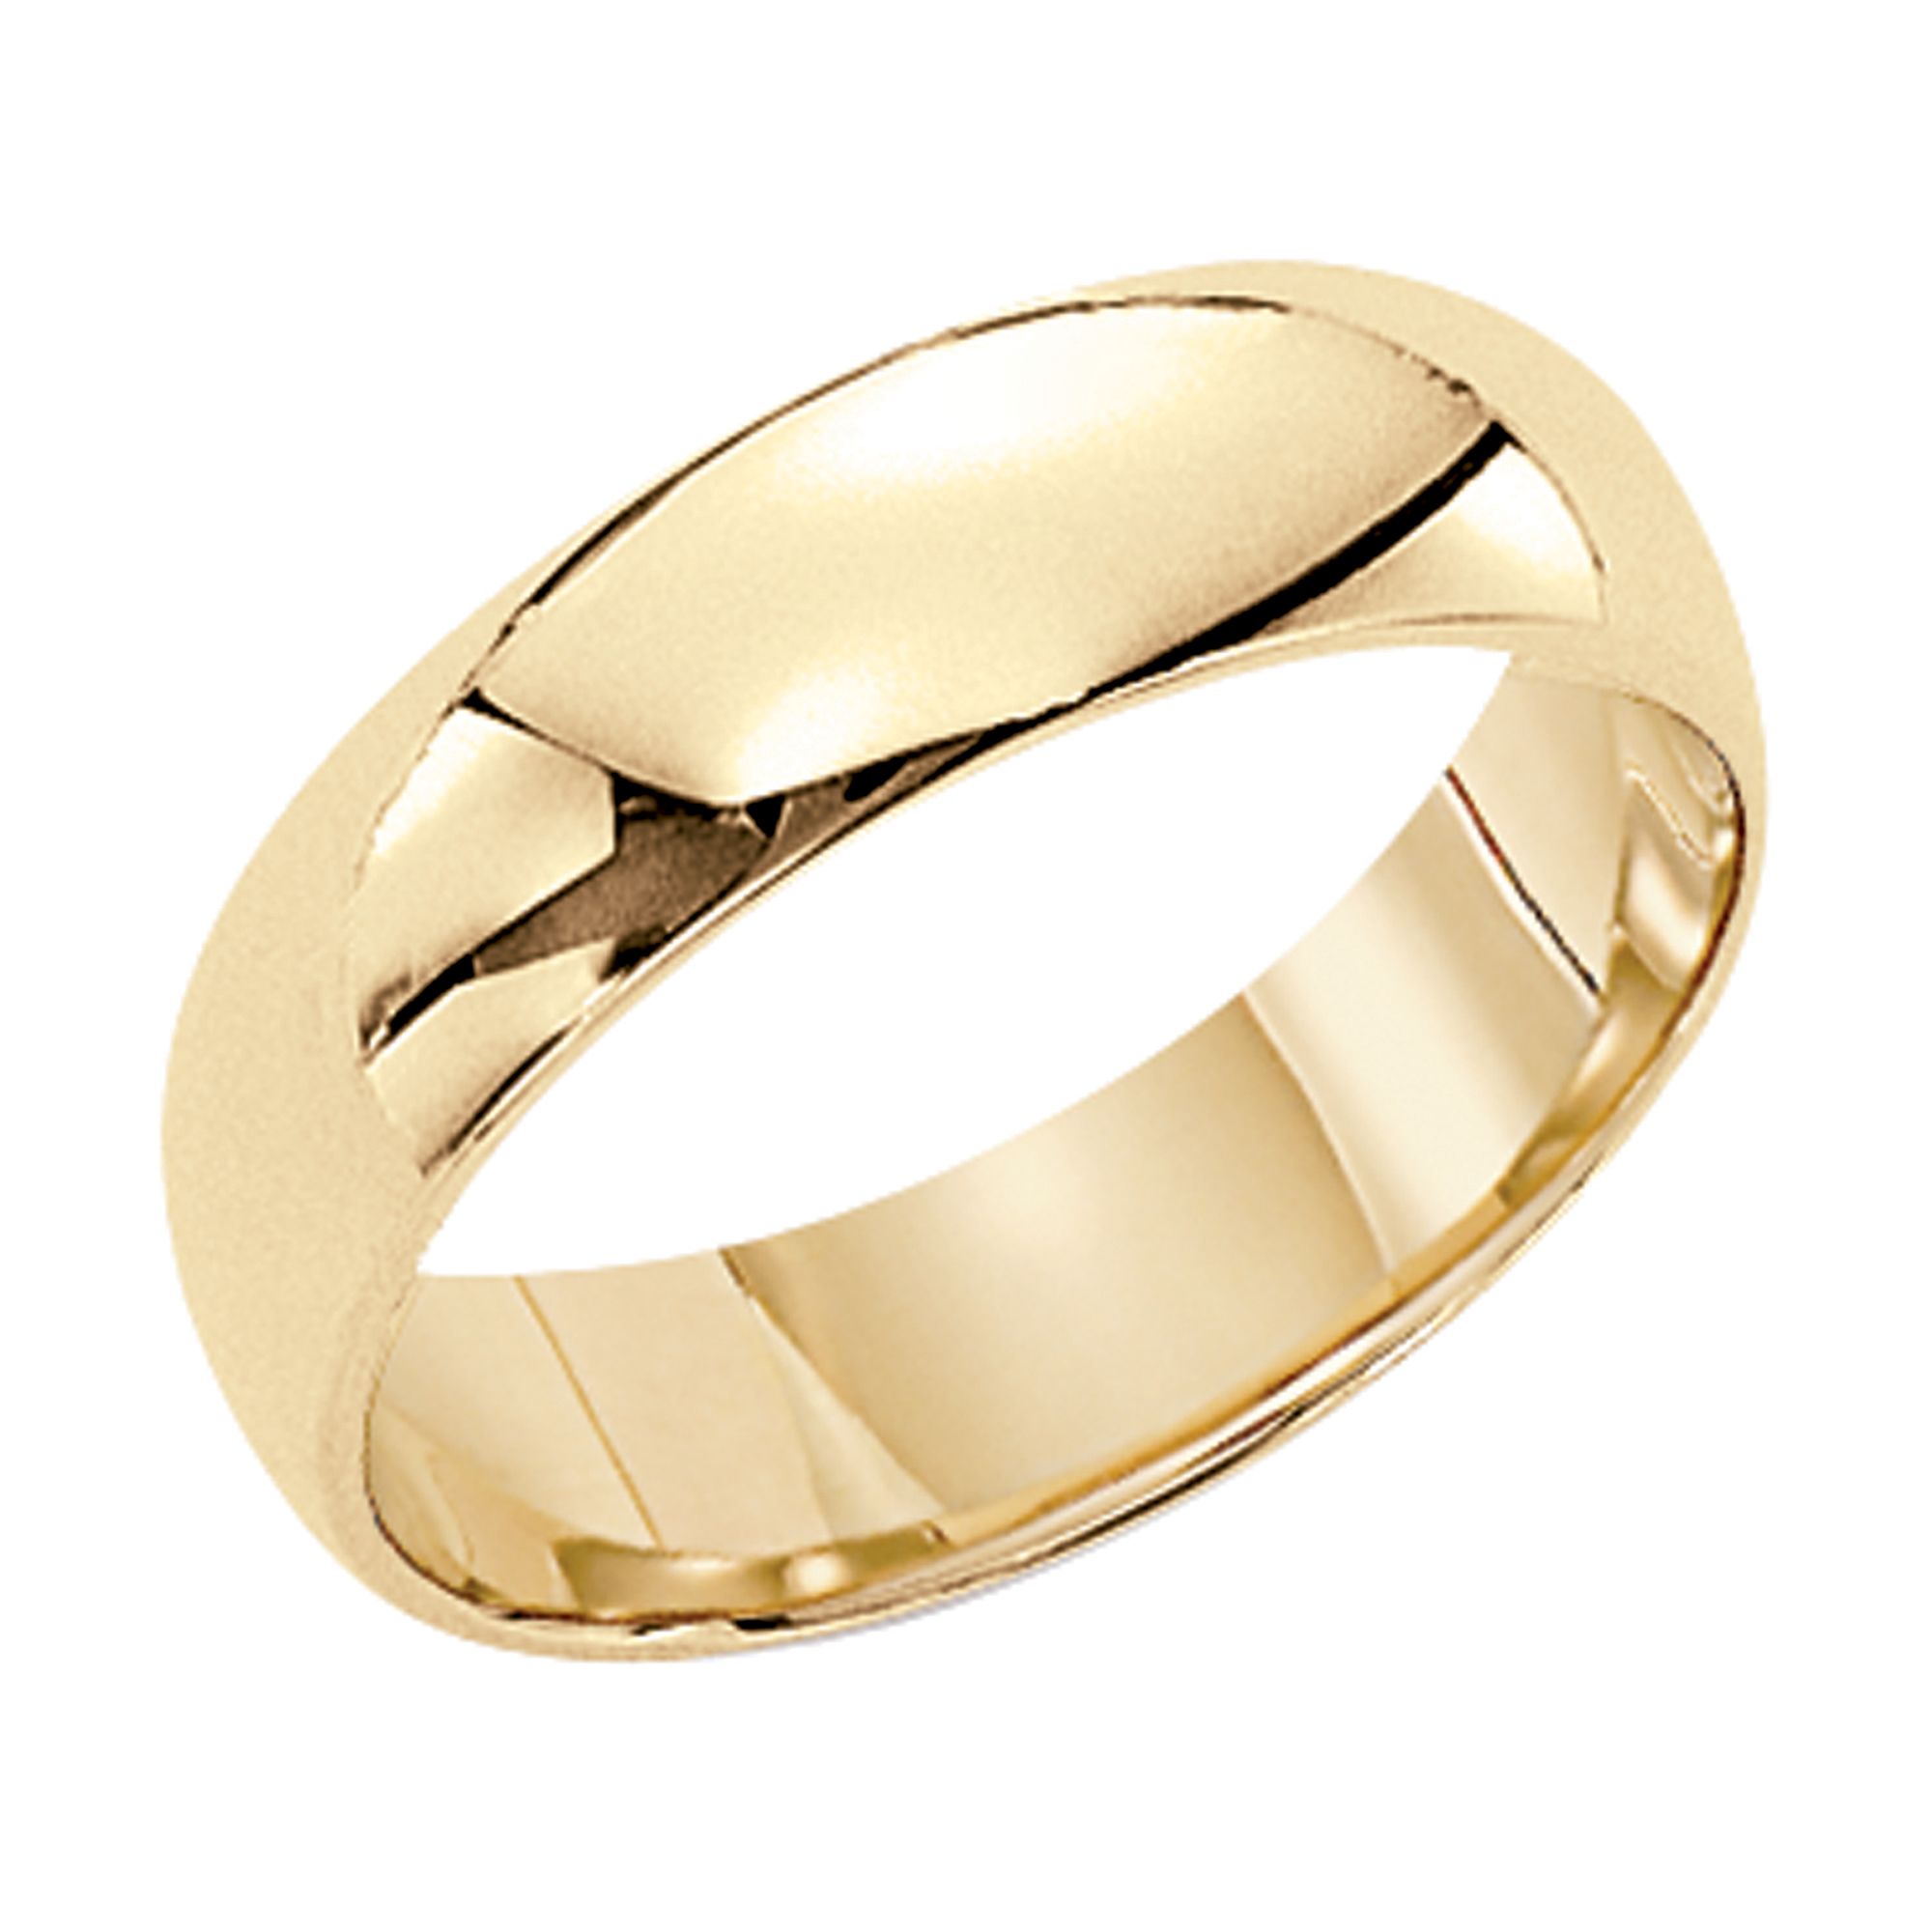 3mm Plain Wedding Band in 14K Yellow Gold